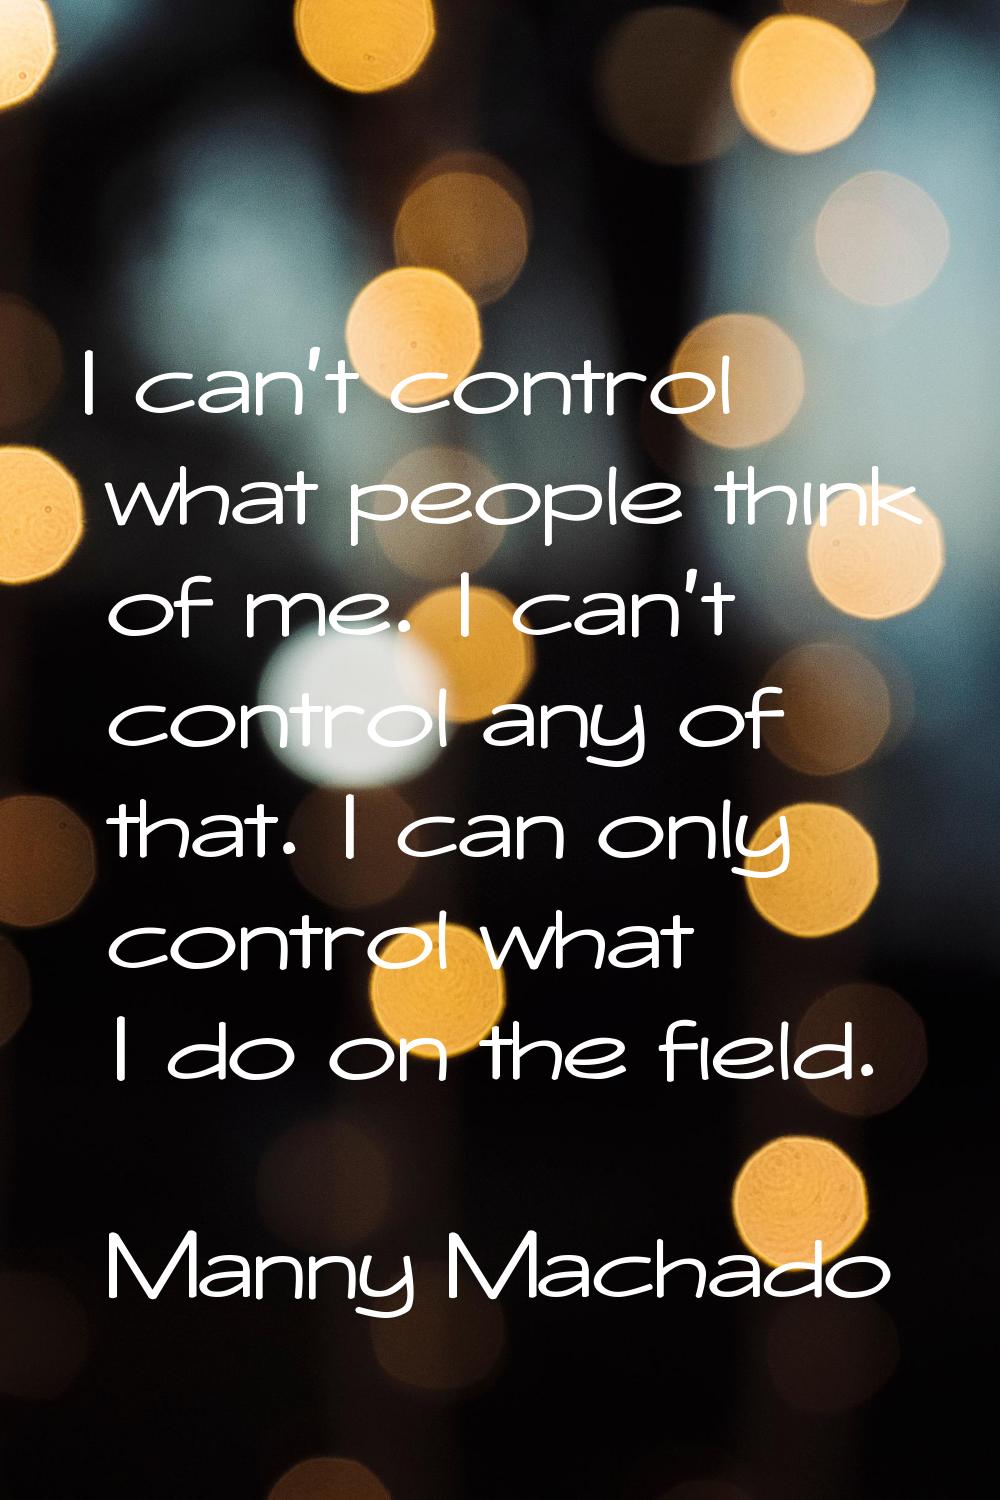 I can't control what people think of me. I can't control any of that. I can only control what I do 